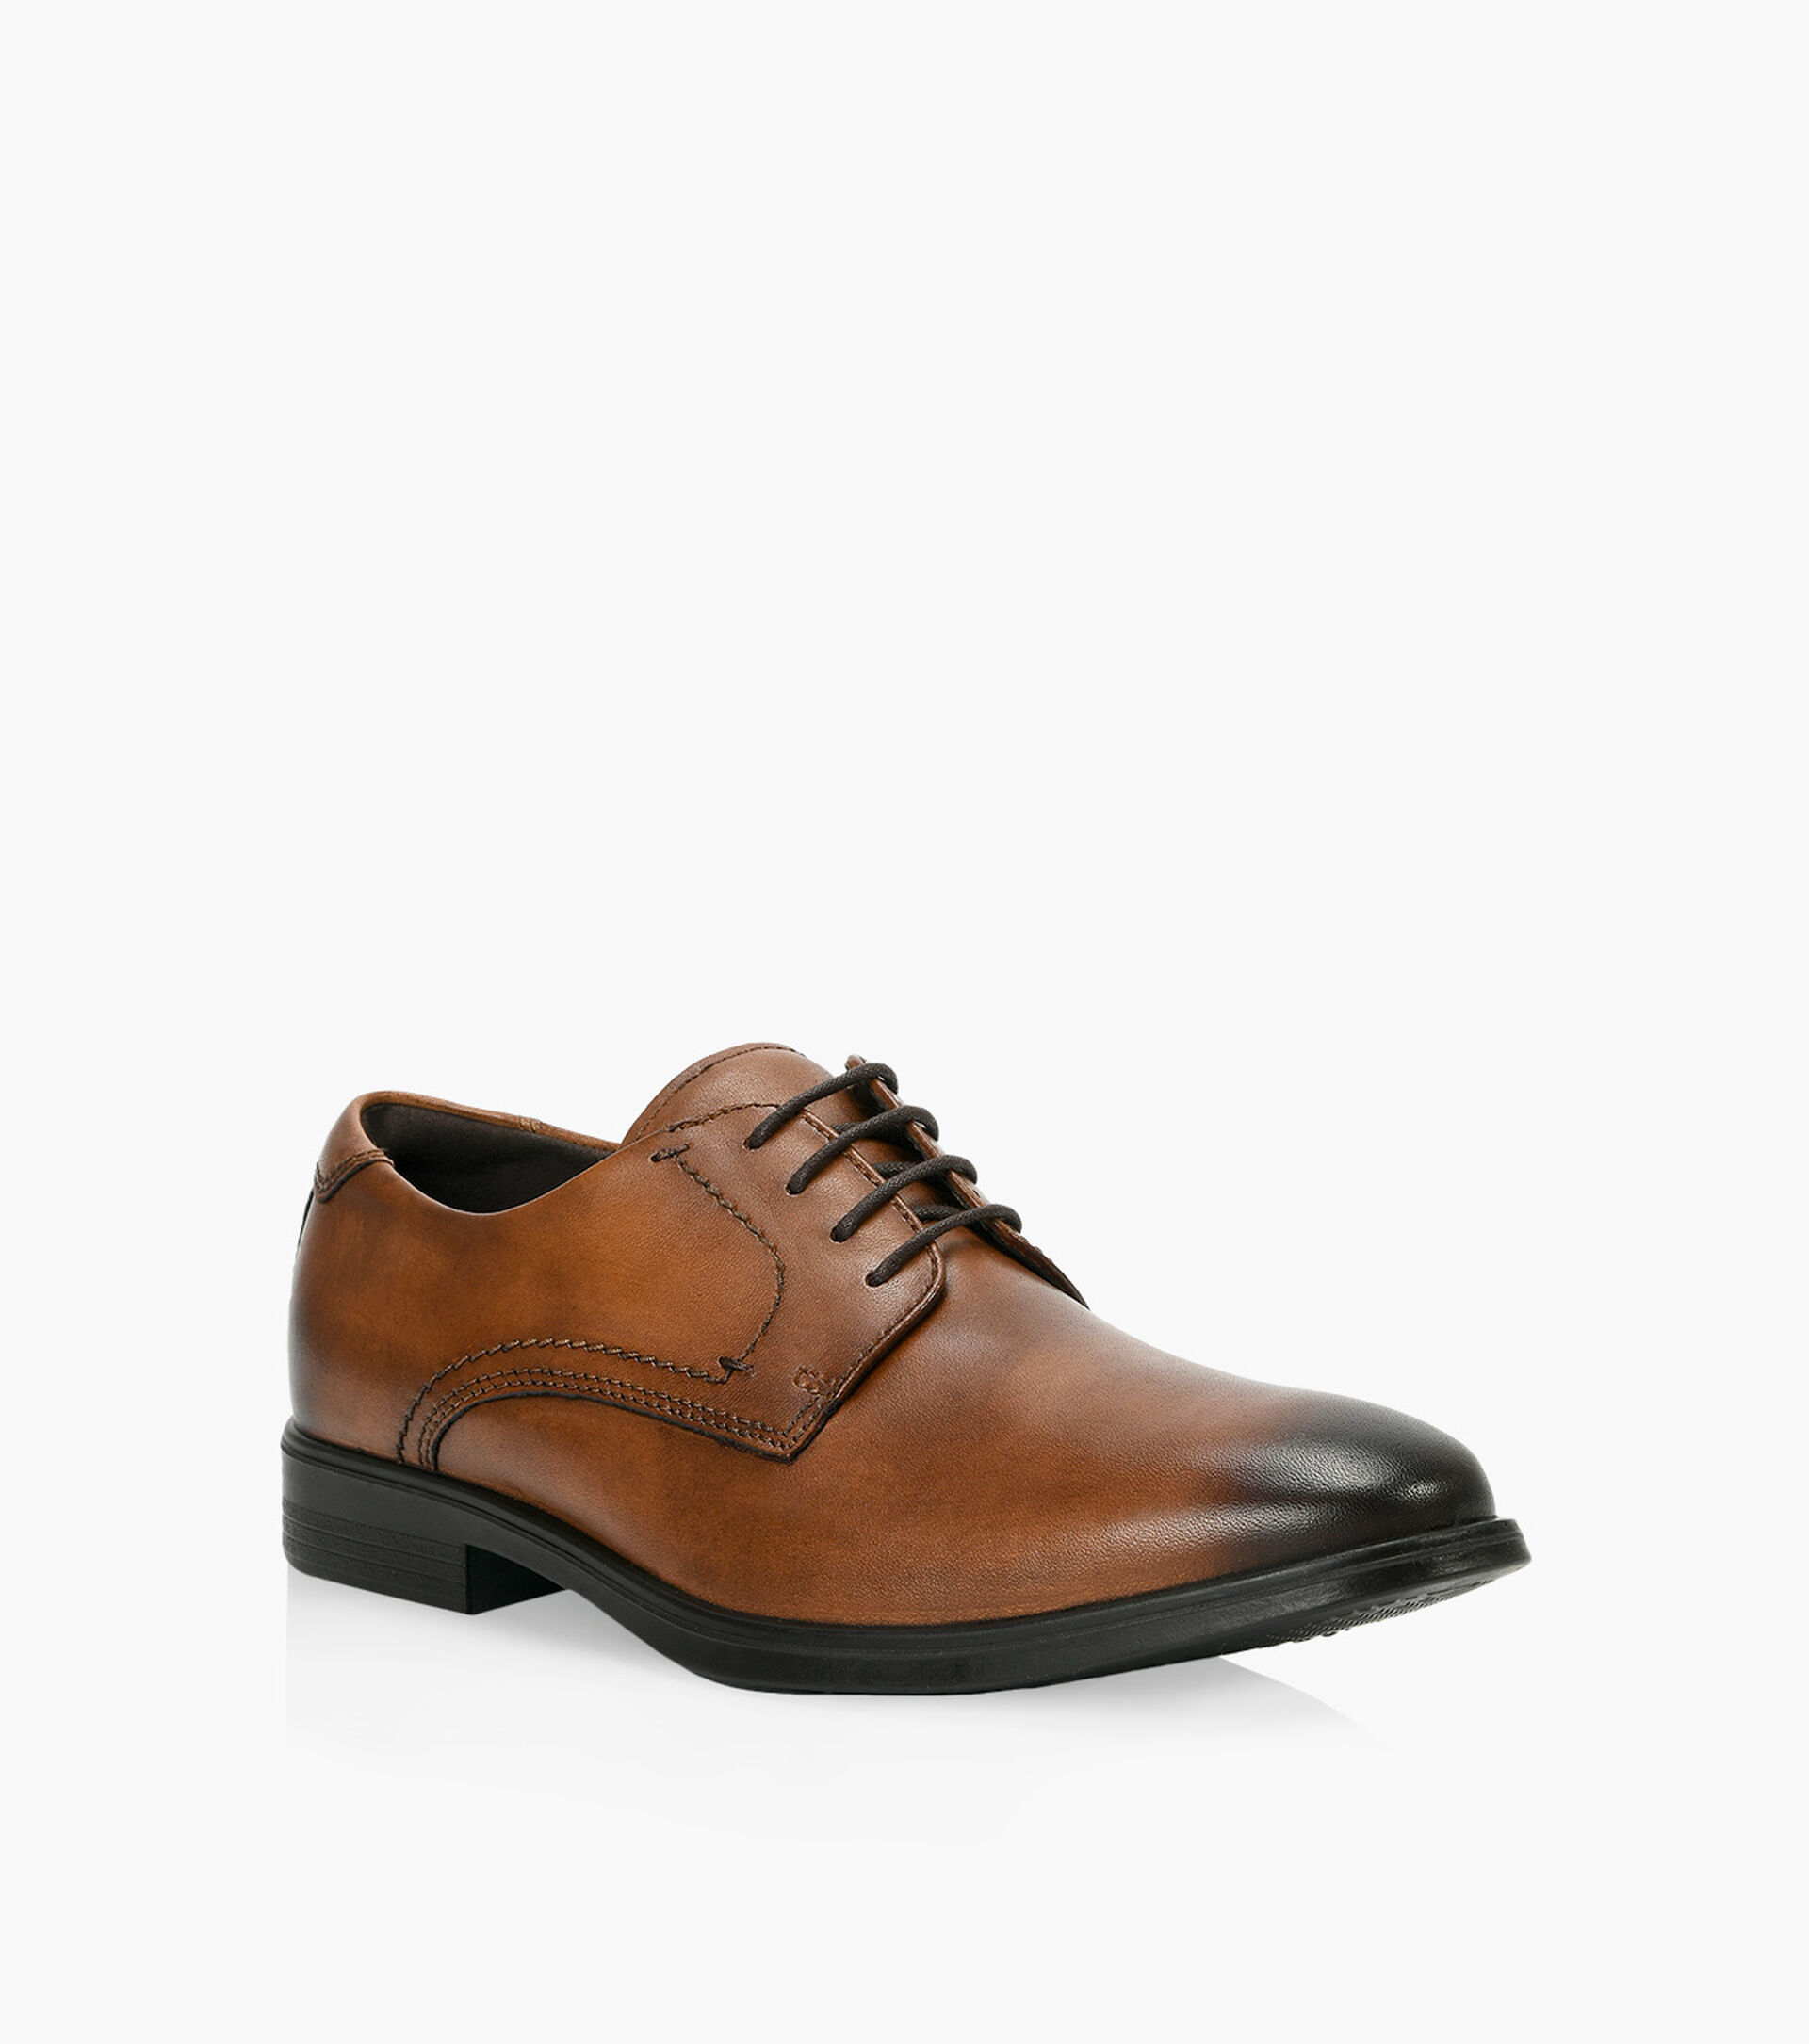 ECCO MELBOURNE Leather | Browns Shoes